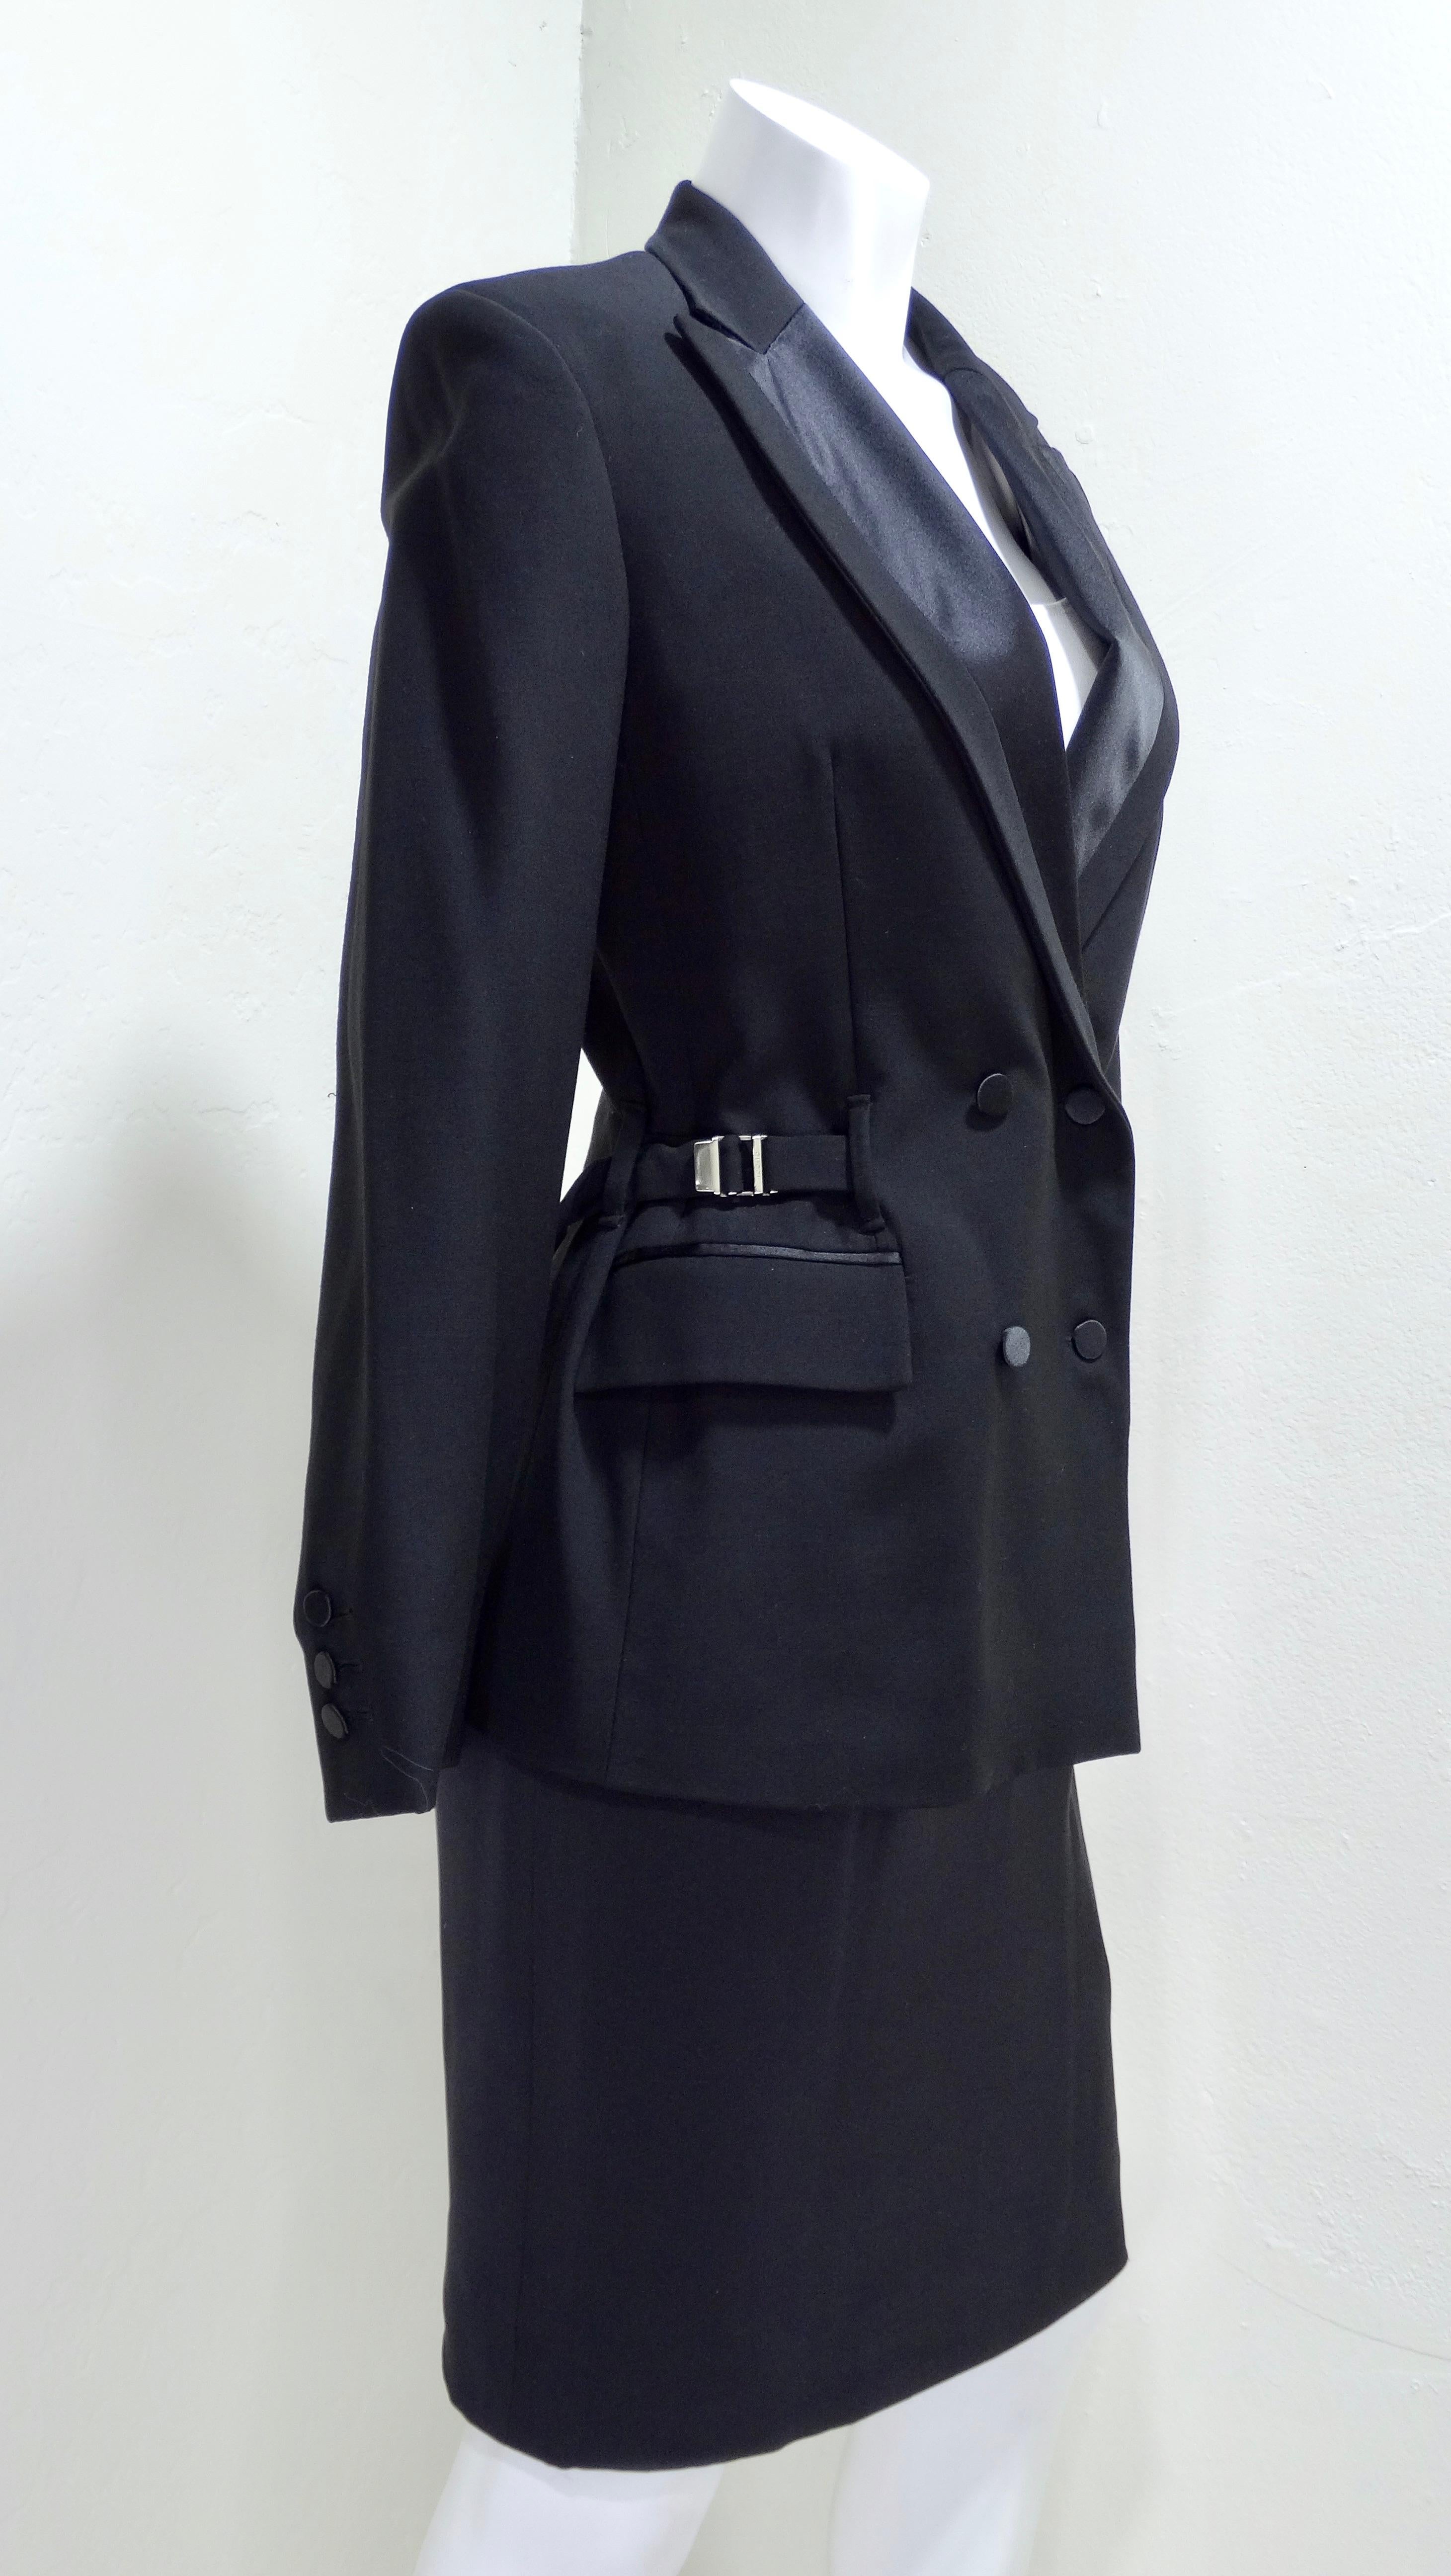 FOUND! Your next power suit. Mixing masculine and feminine touches is Tom Ford's signature. This 1990's suit speaks to the current events happening at the time, as Tom Ford was taking Gucci by storm and revolutionizing and modernizing the designs.